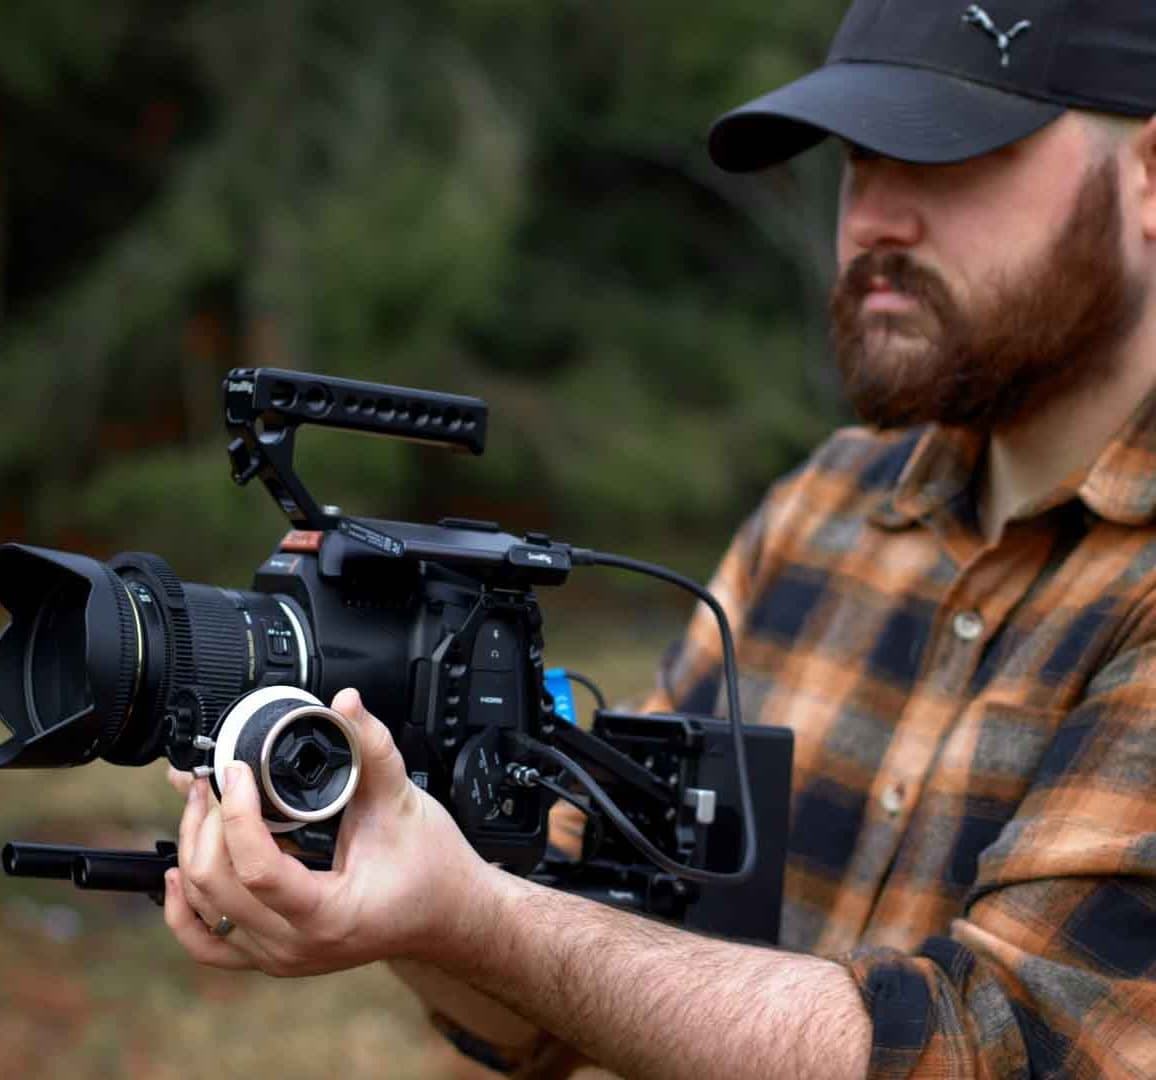 Nate Noye filming with the Black Magic Pocket Cinema 6K PRO with a Sigma 17 to 55 mm f2.8 lens in a smallrig brand camera cage.